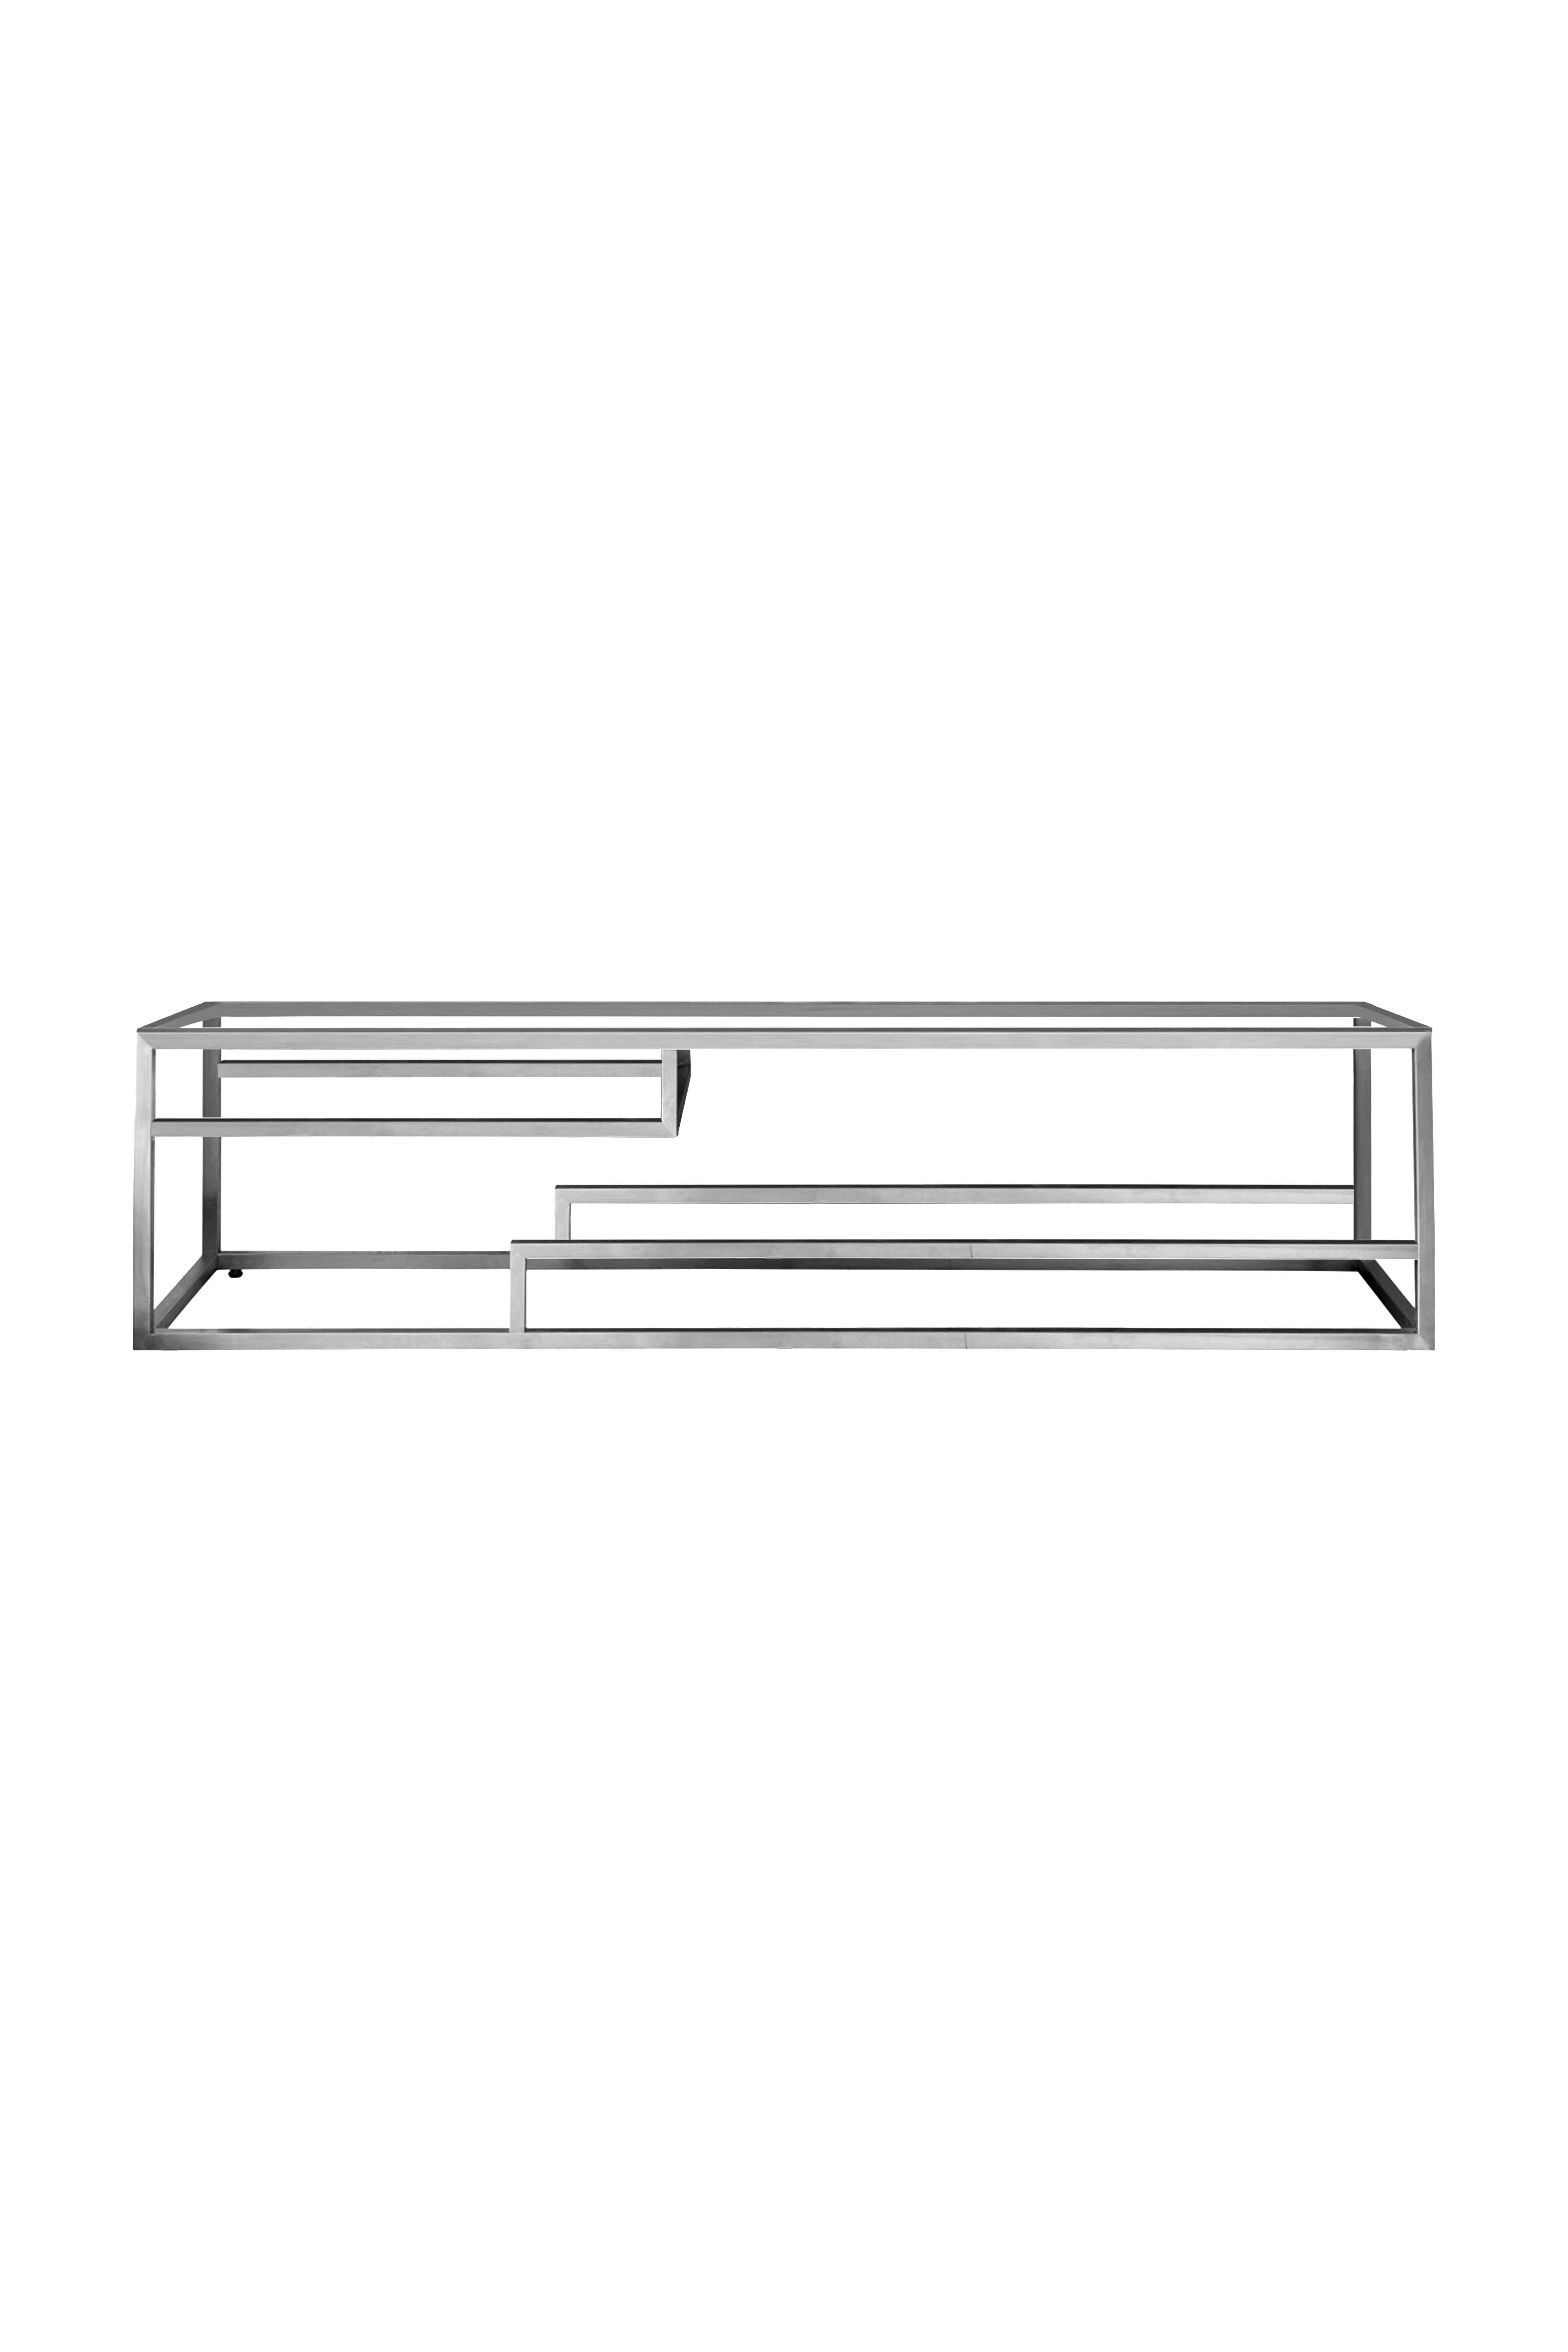 James Martin 389-B72-STN 72" Cabinet base for Columbia Cabinets, Satin Nickel